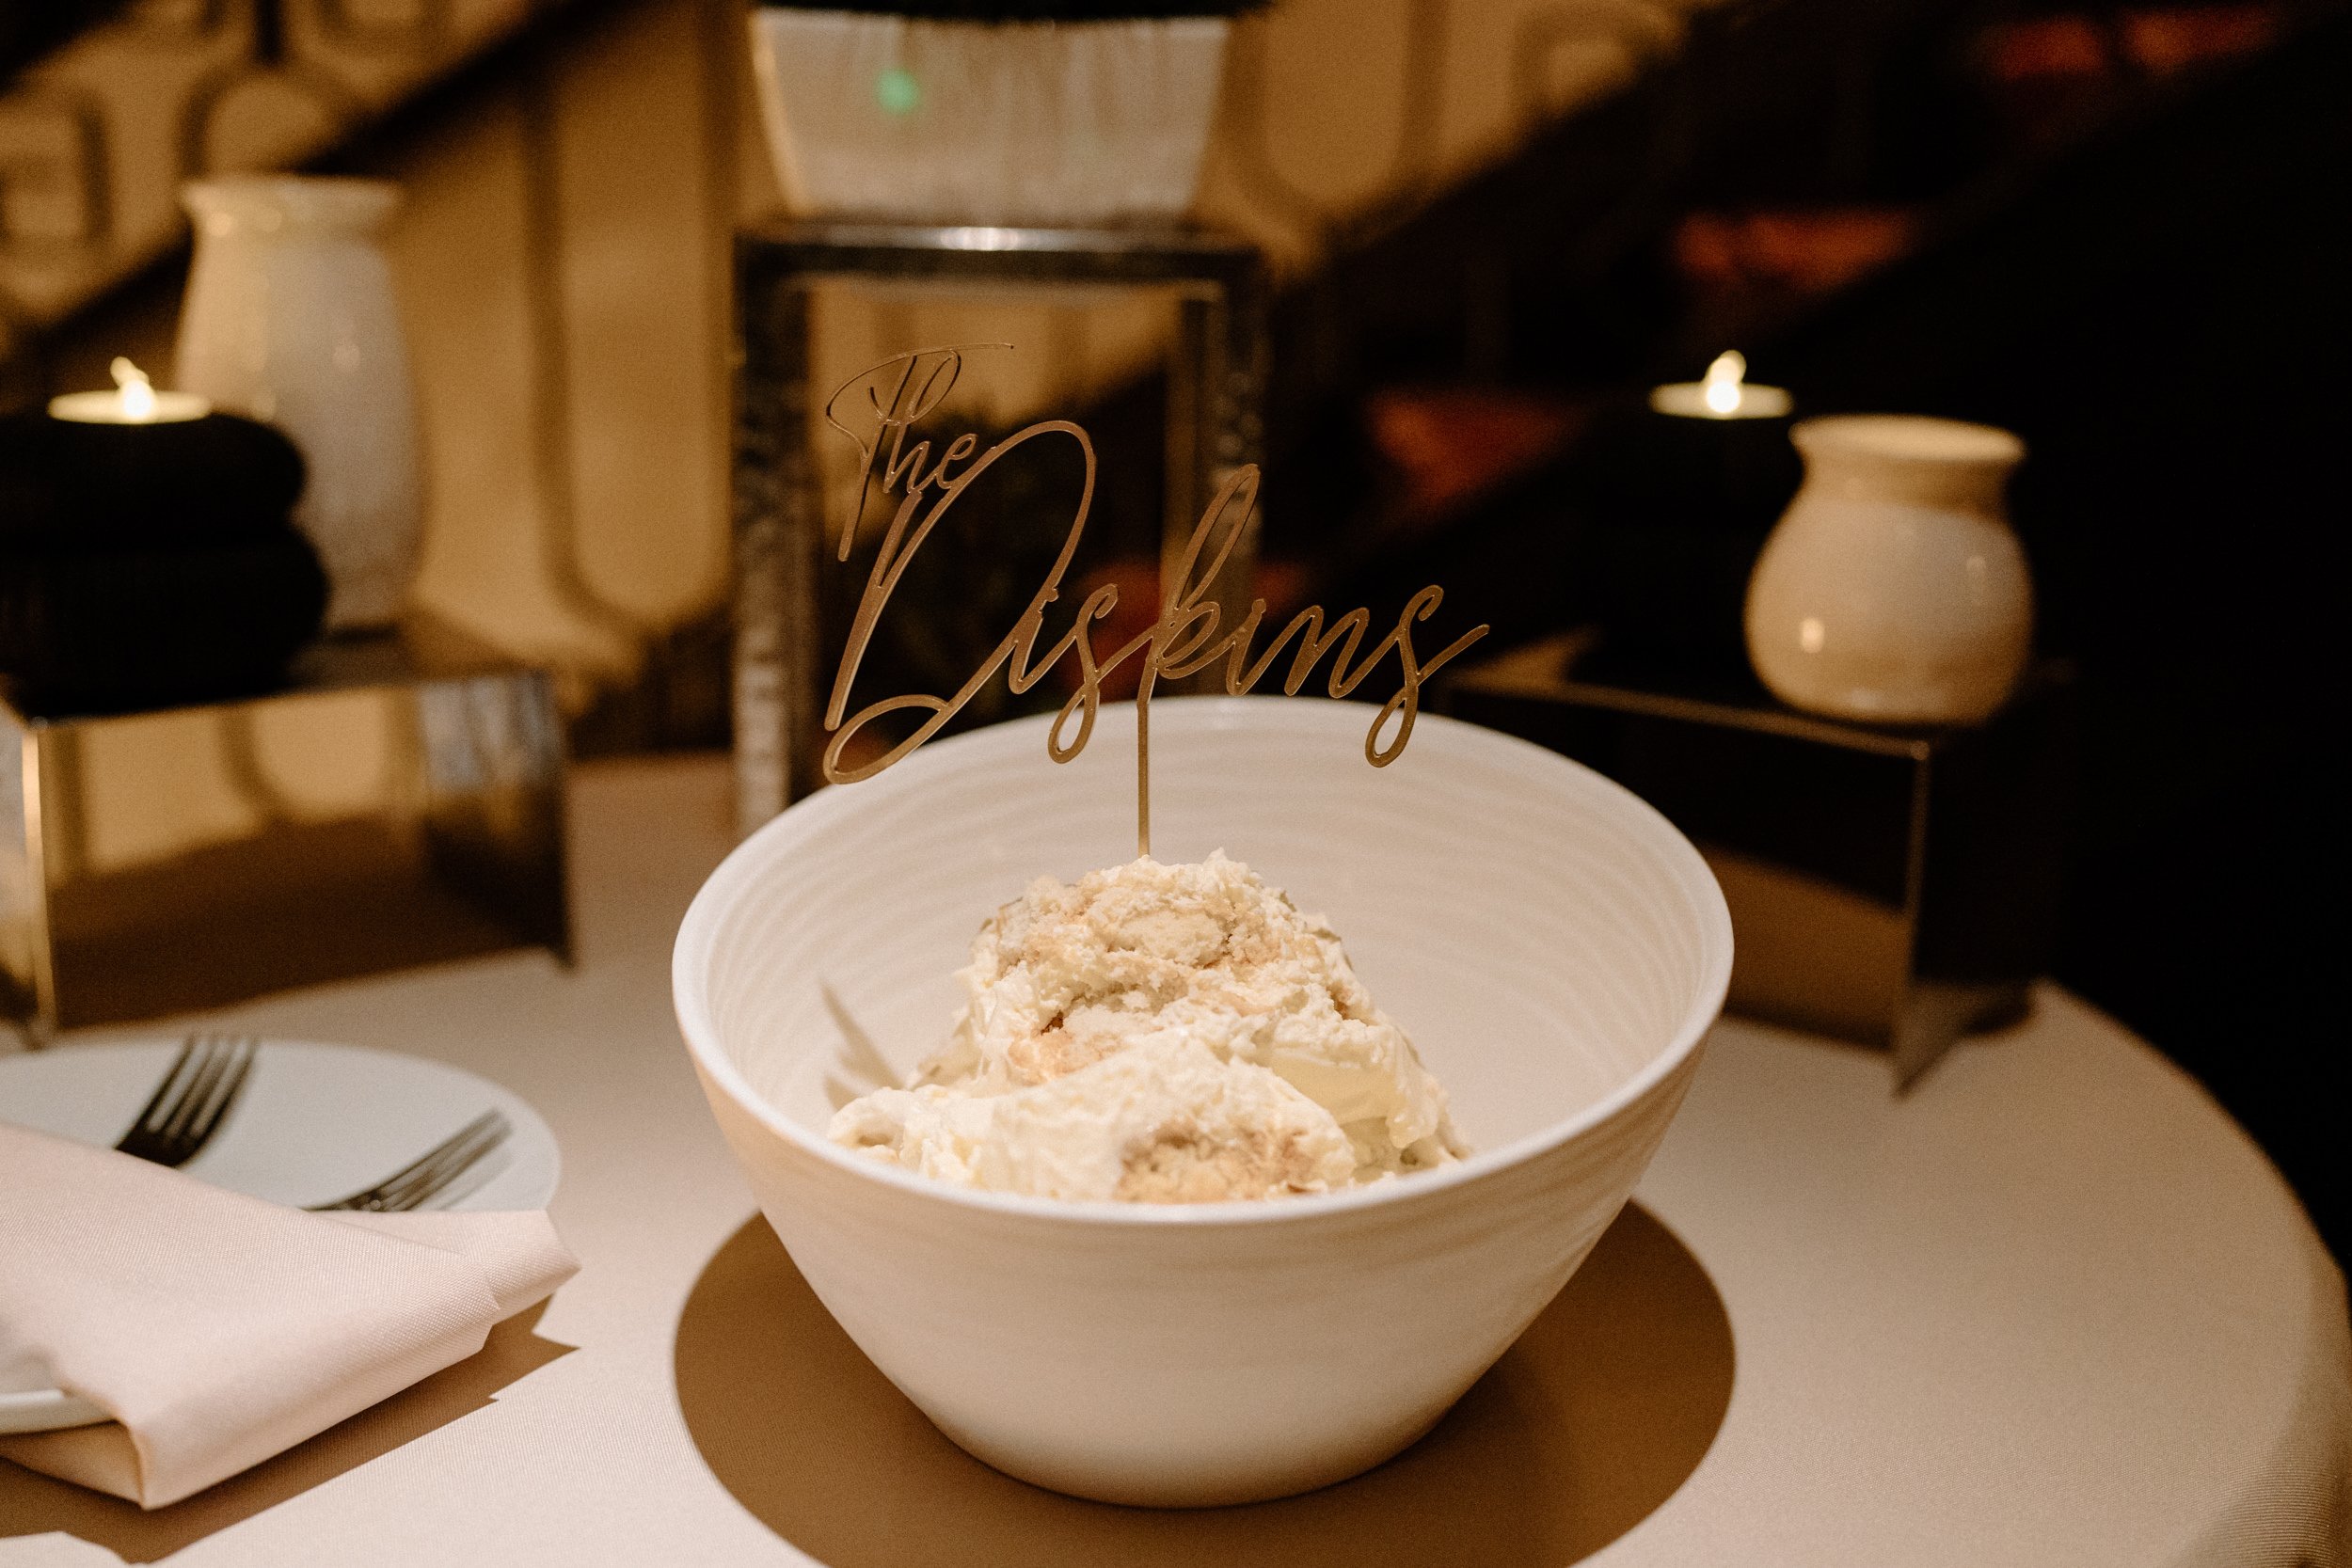 A bowl of vanilla ice cream with a sign that reads "The Diskins"